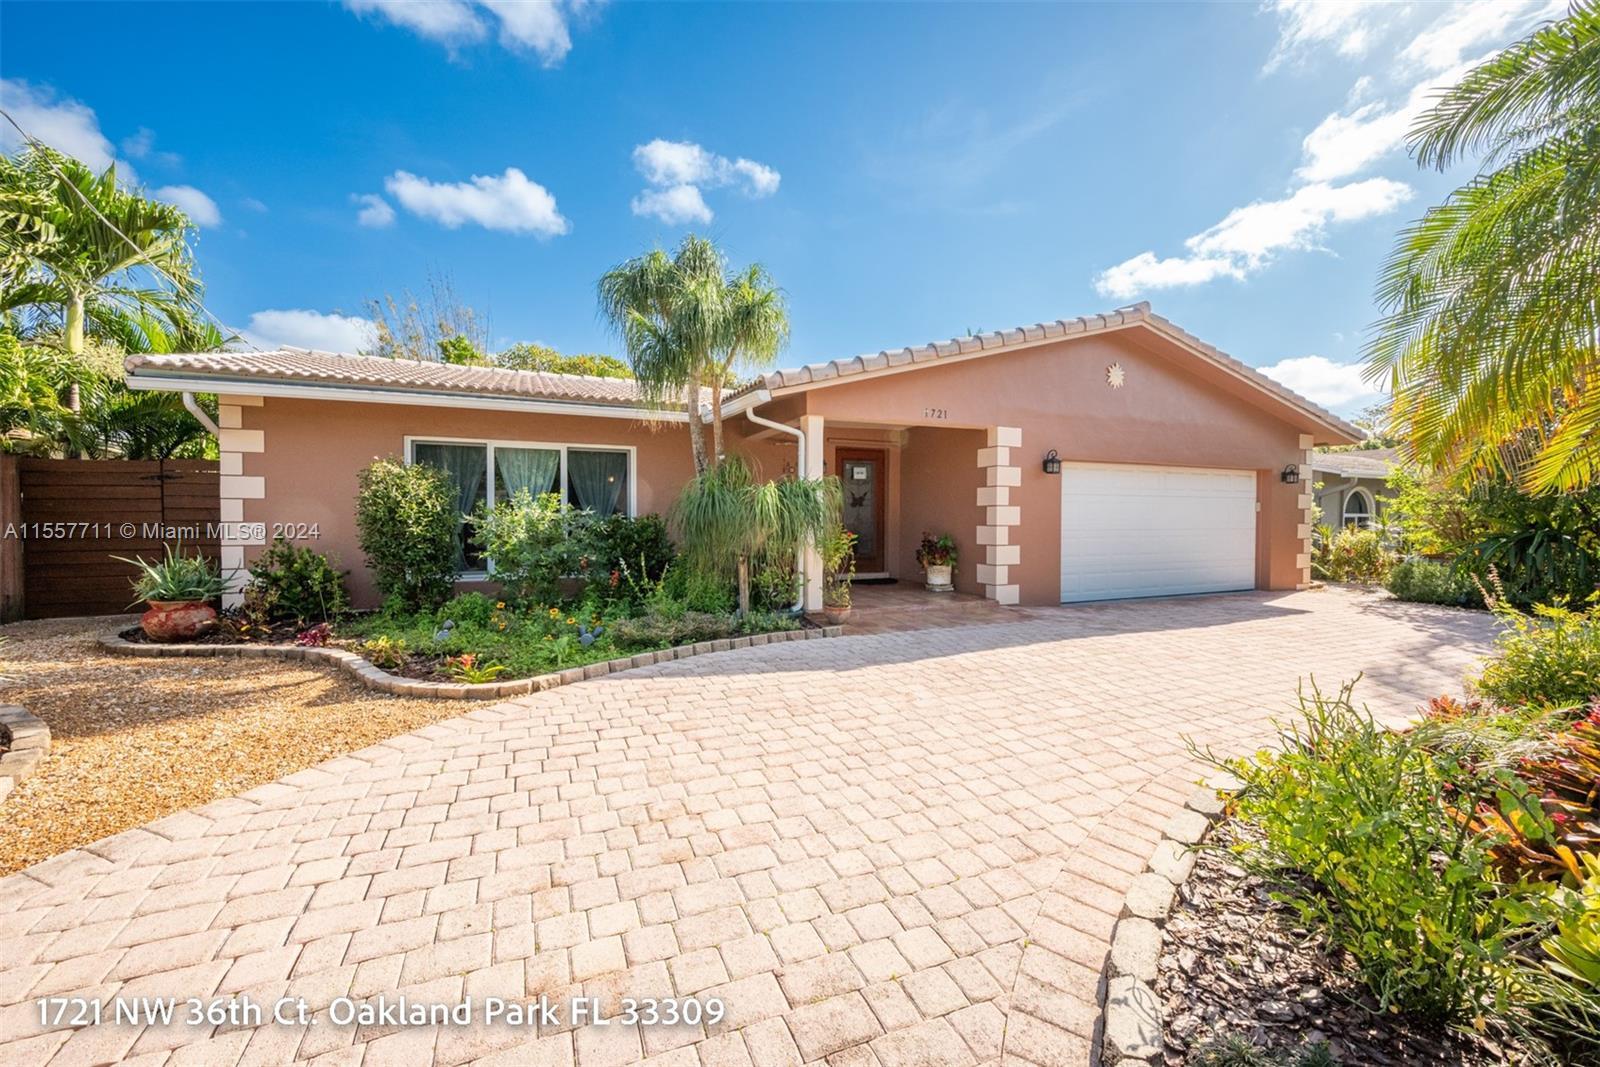 Photo of 1721 NW 36th Ct in Oakland Park, FL